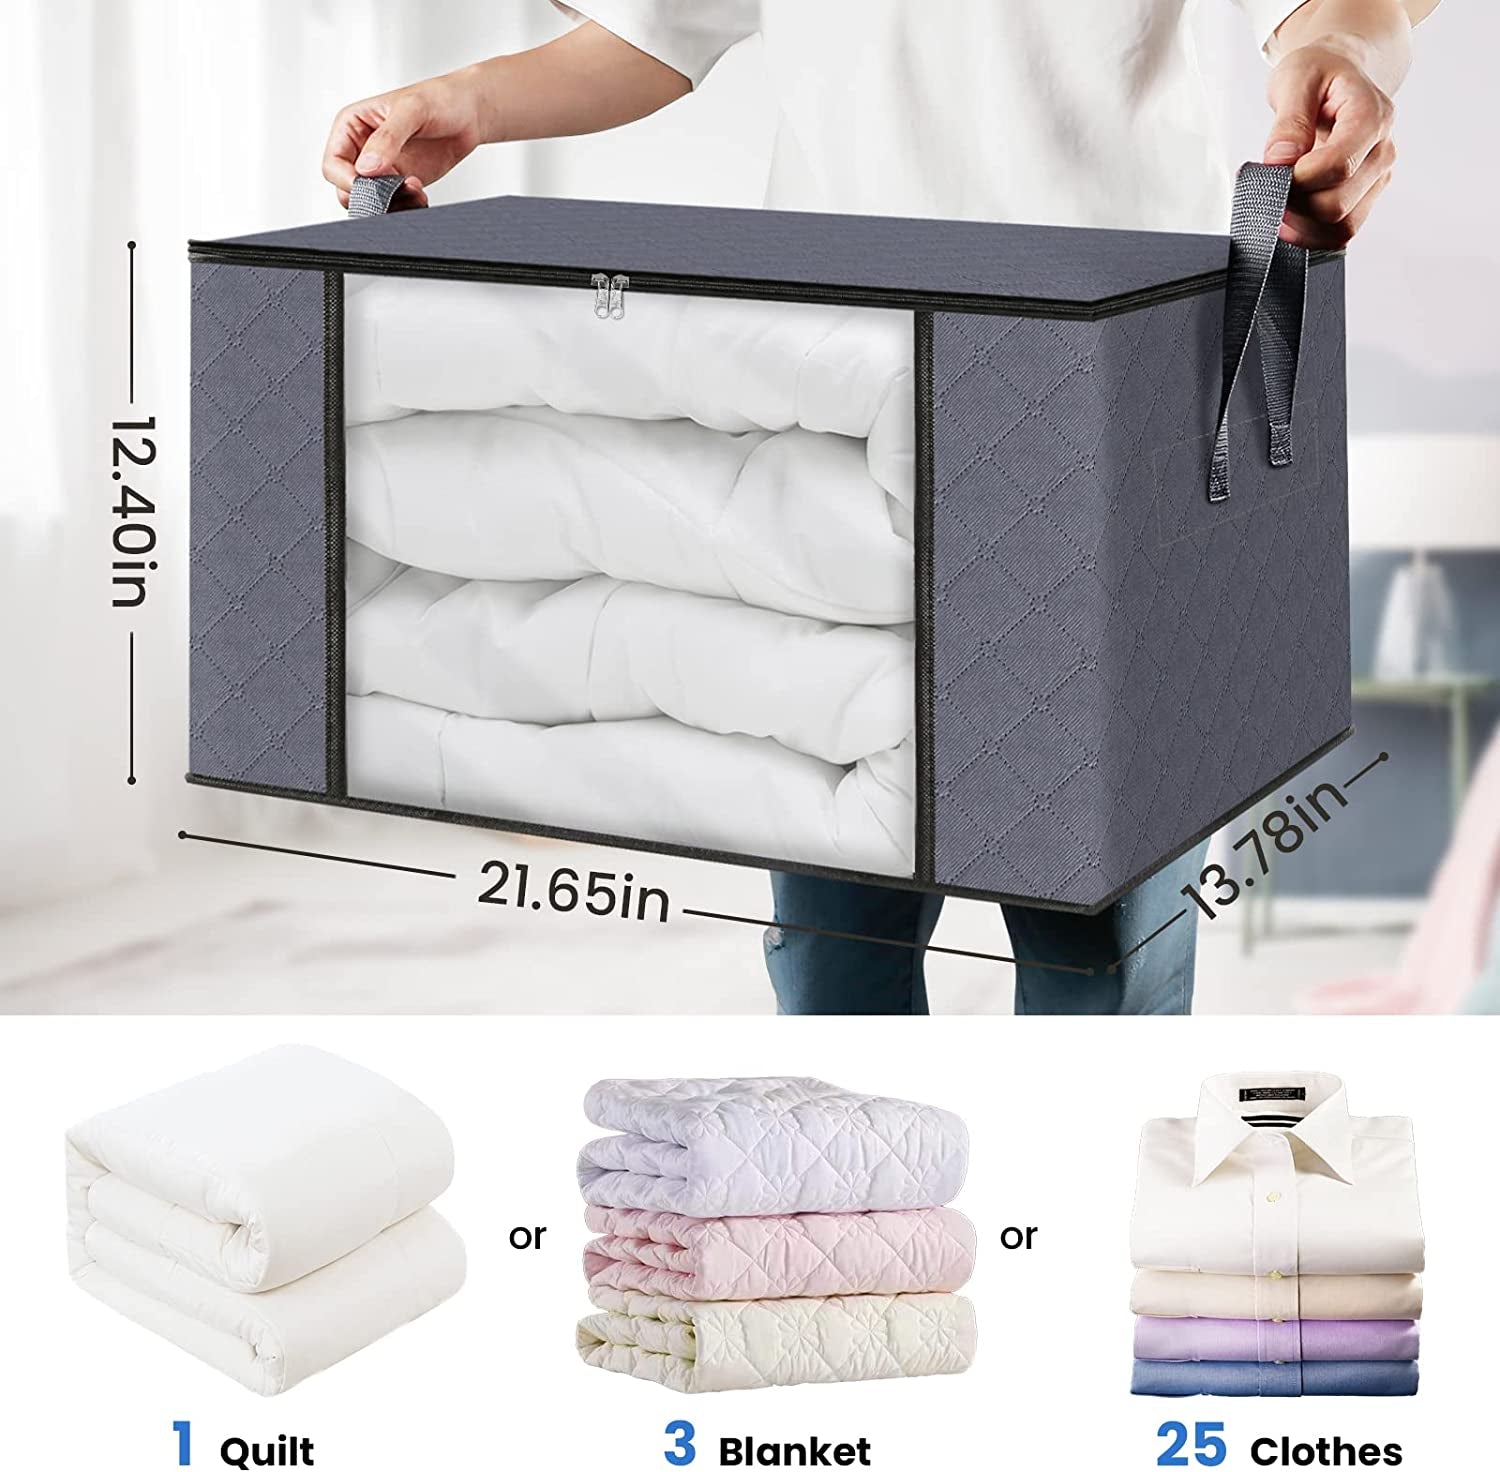  Storage Containers for Organizing Bedroom